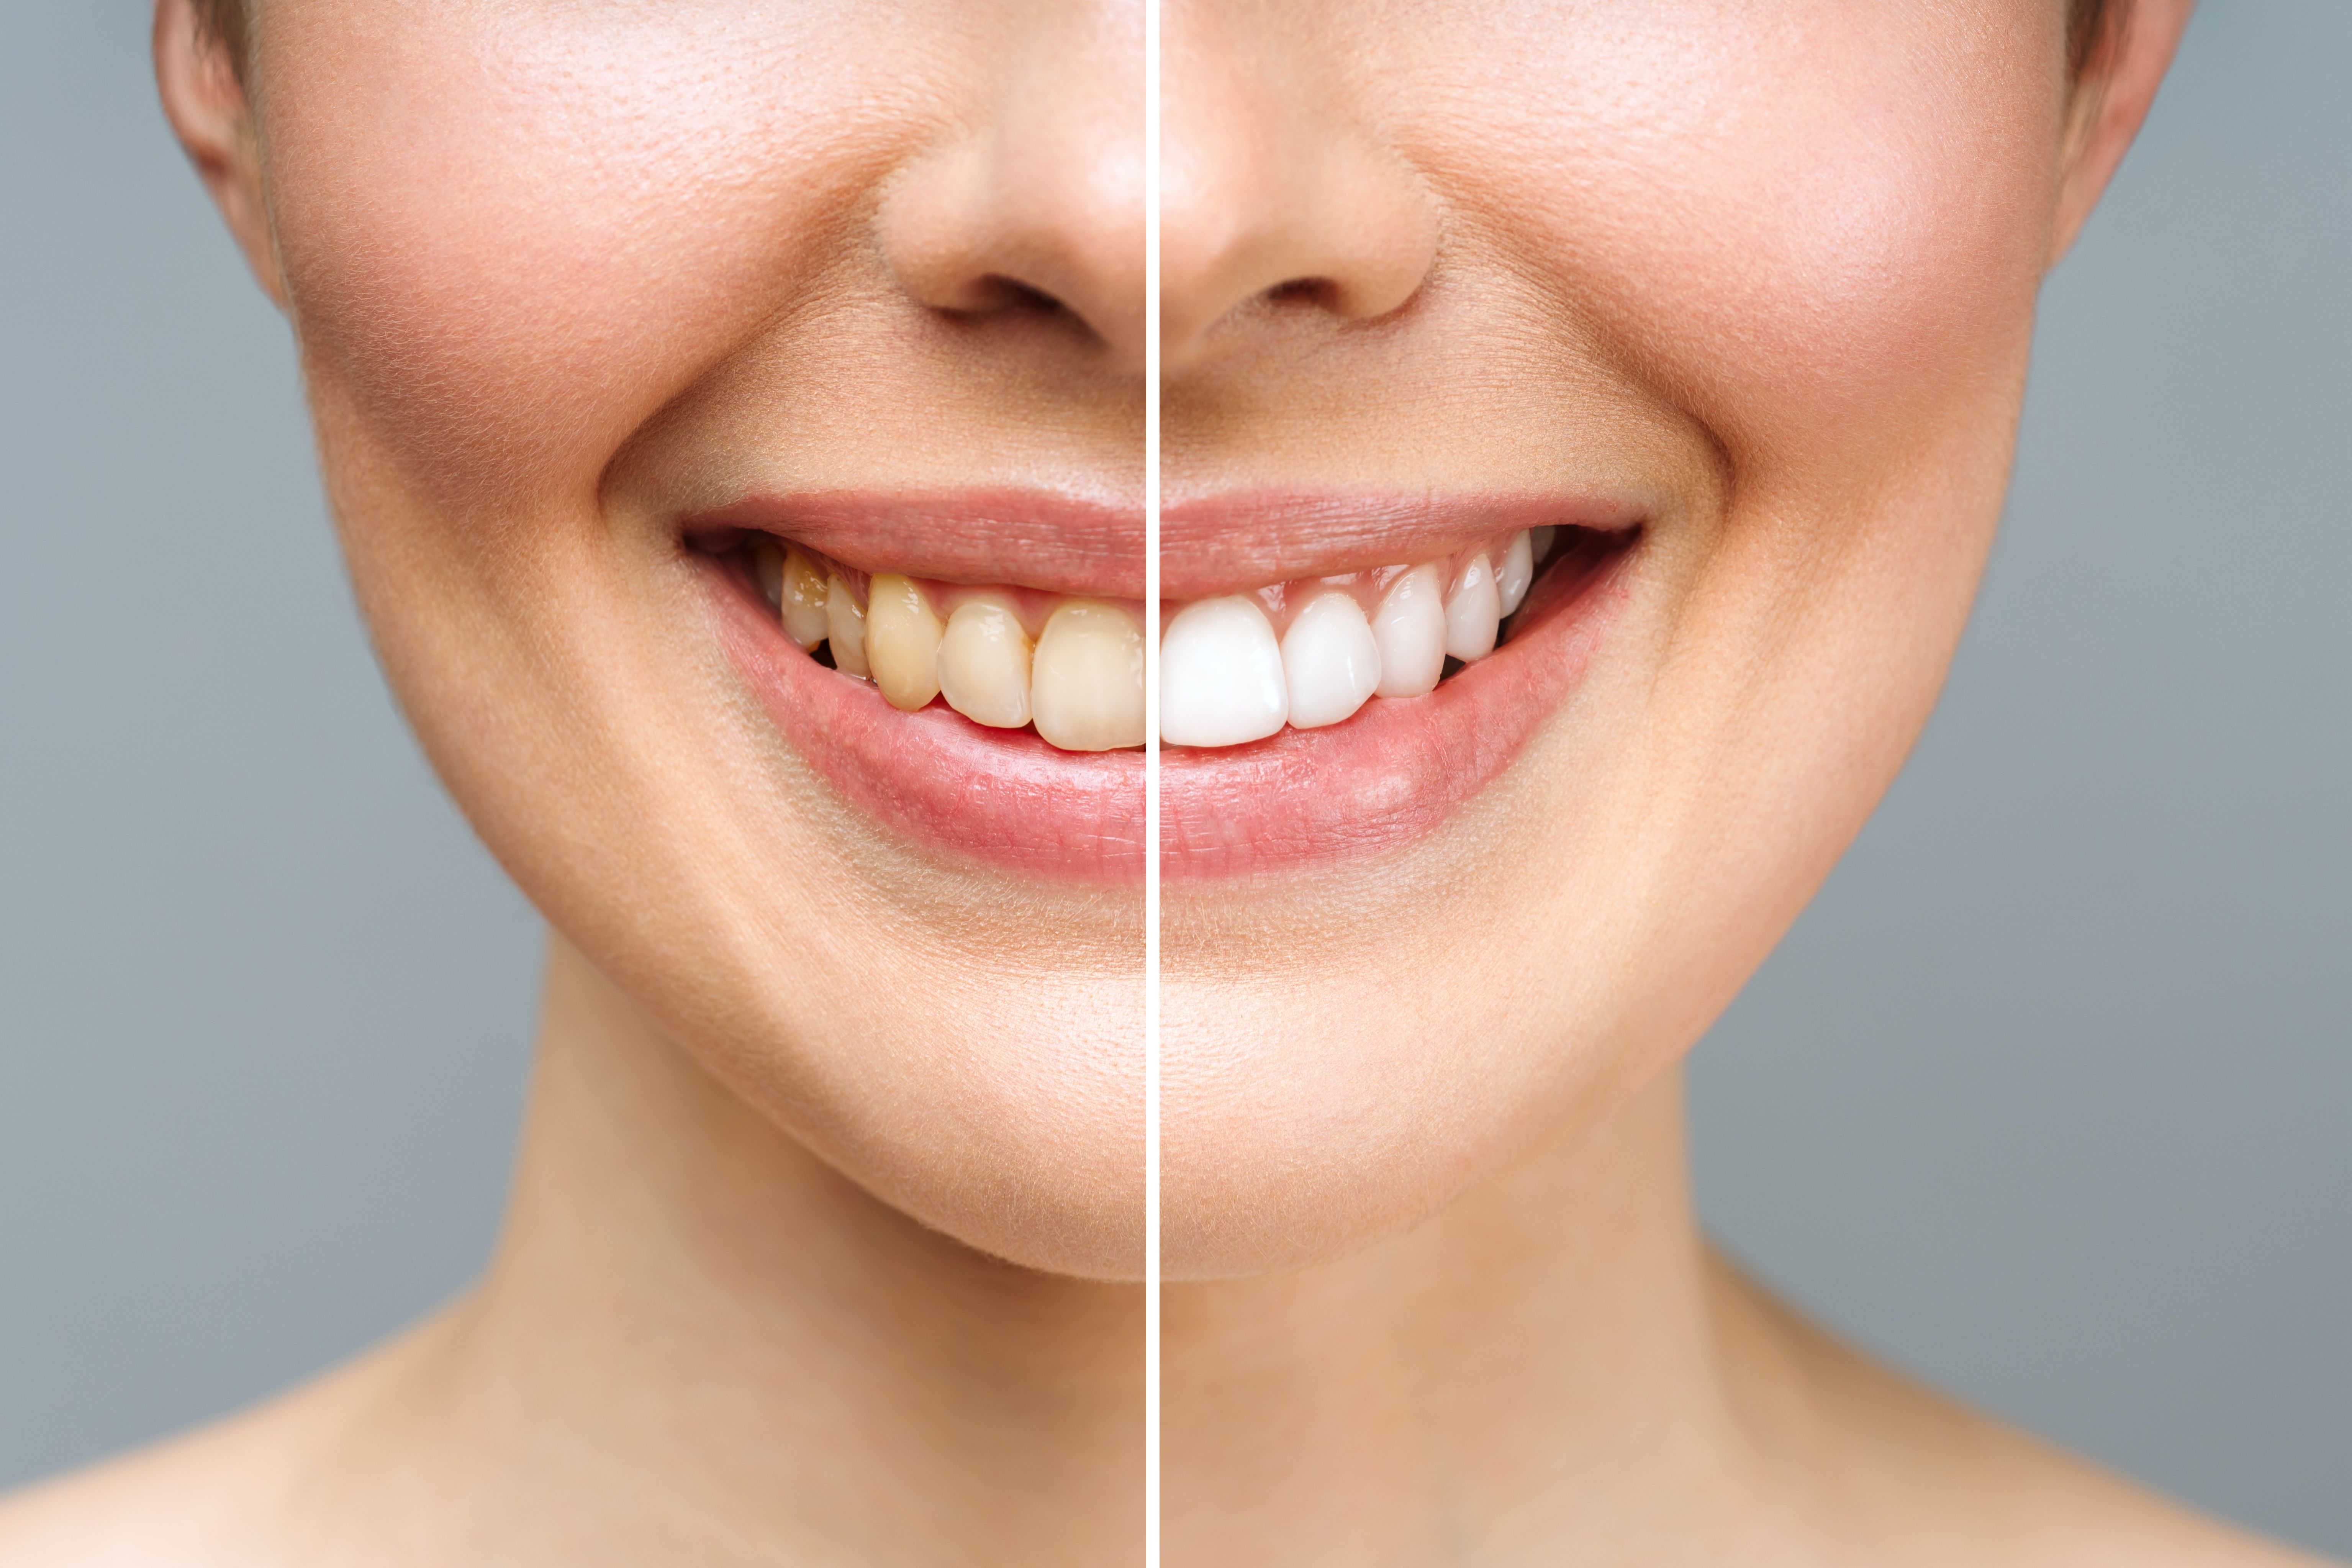 Learn More About Tooth Whitening Technologies